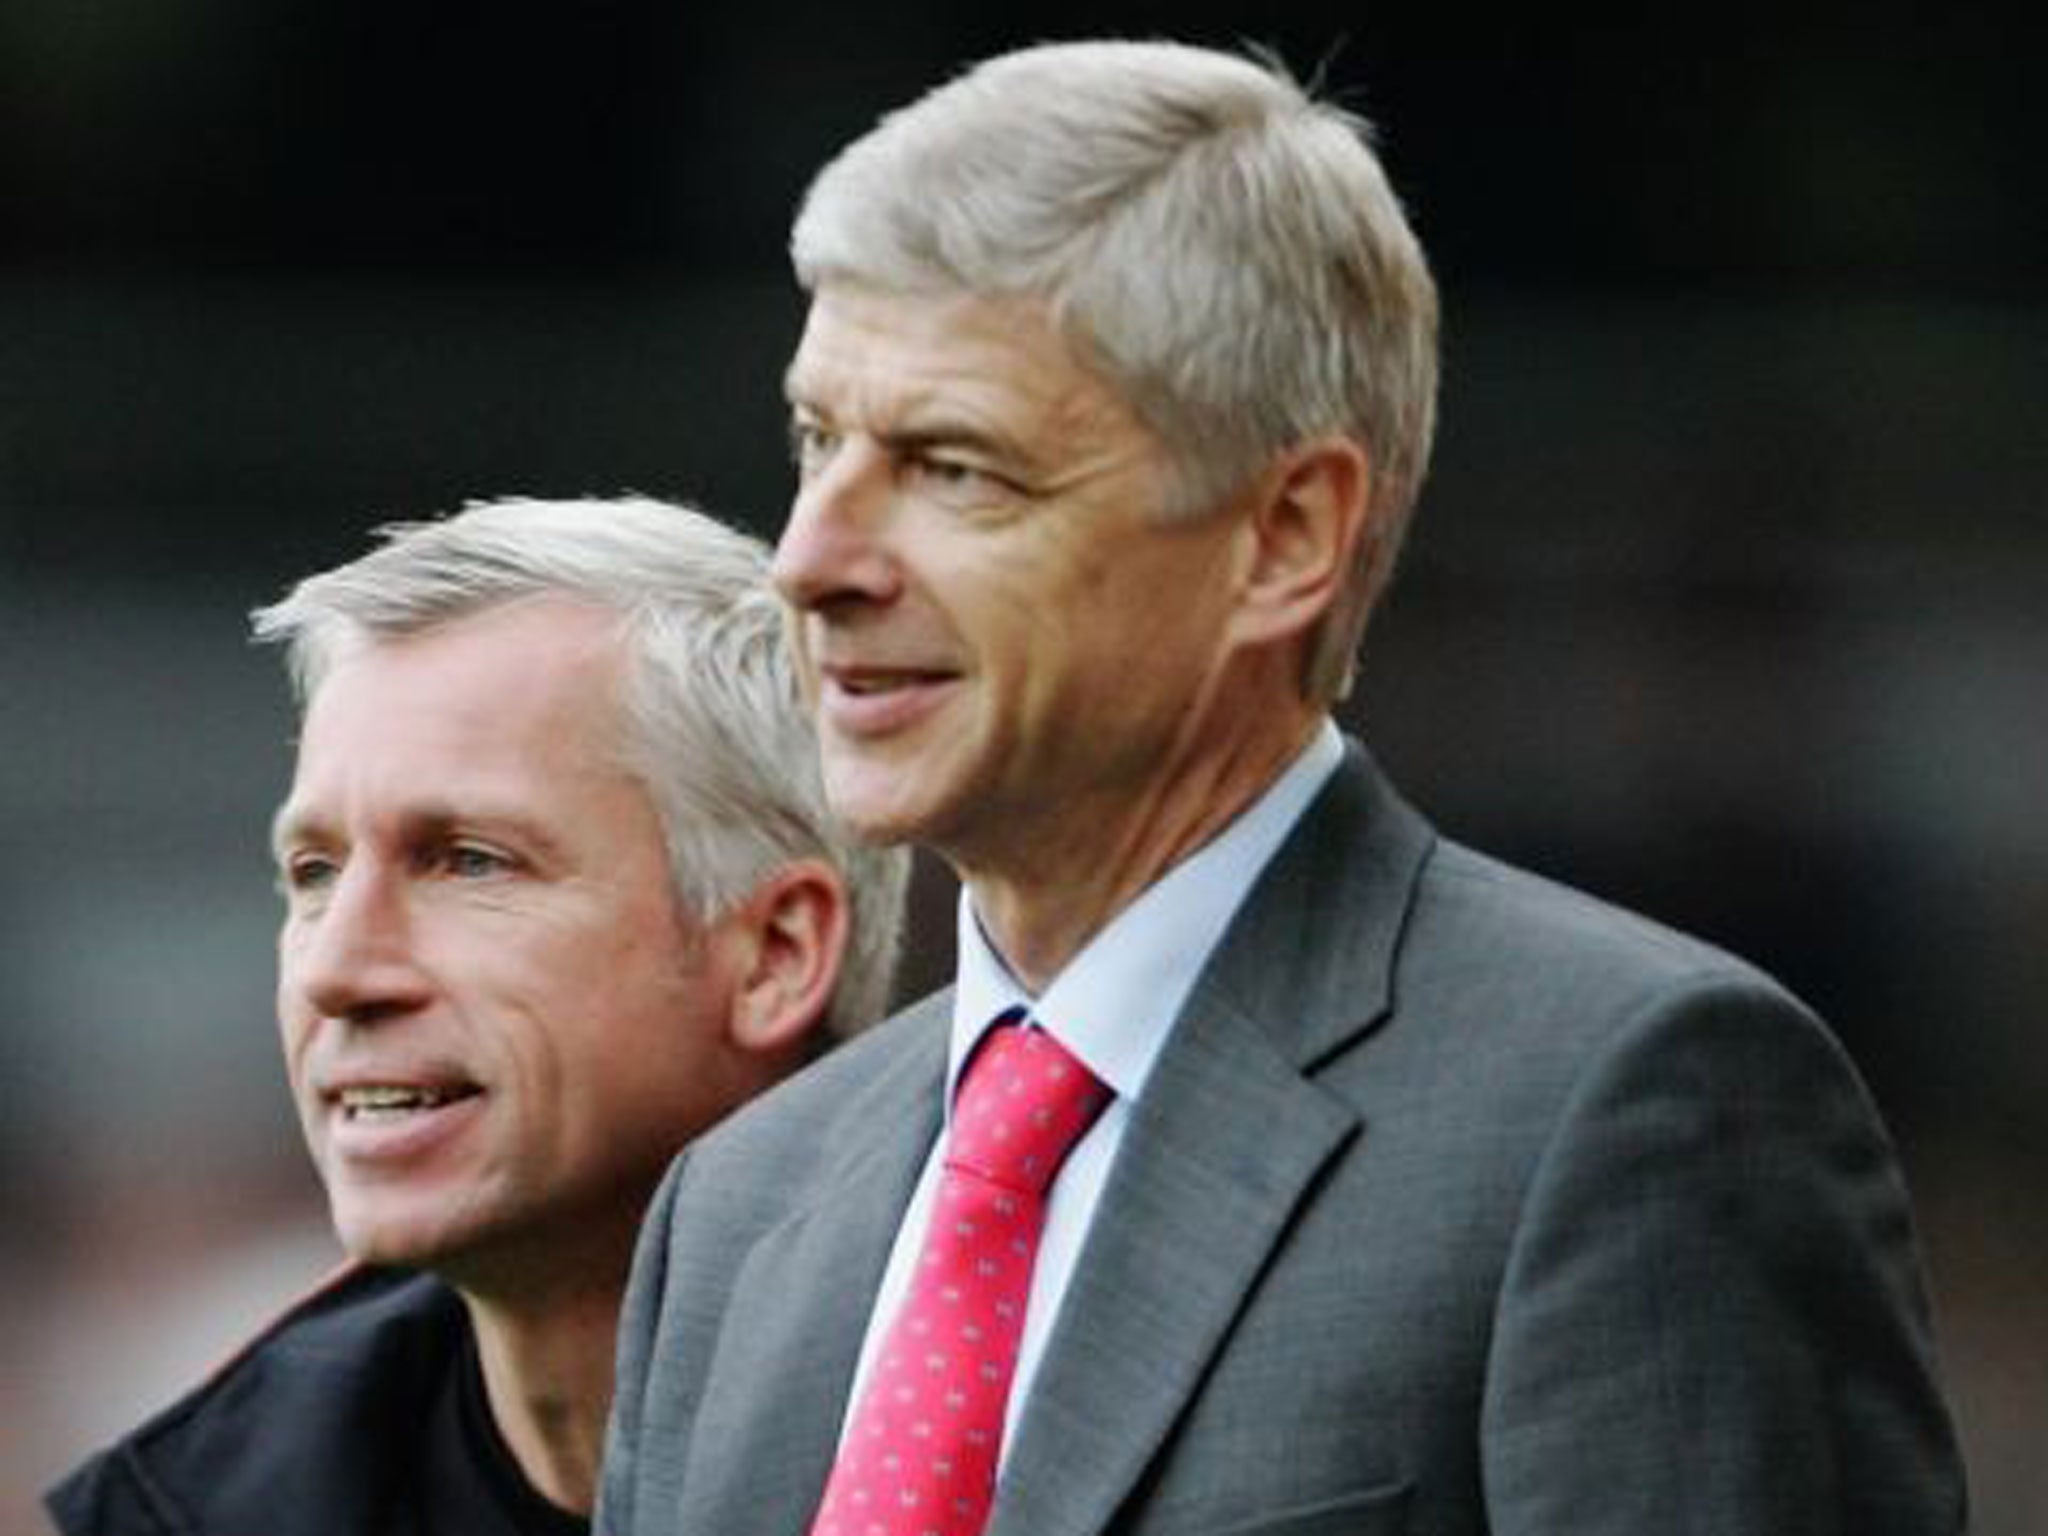 Beside themselves: Alan Pardew (left) does not see eye to eye with Arsène Wenger but says ‘we owe him a bit of a debt’